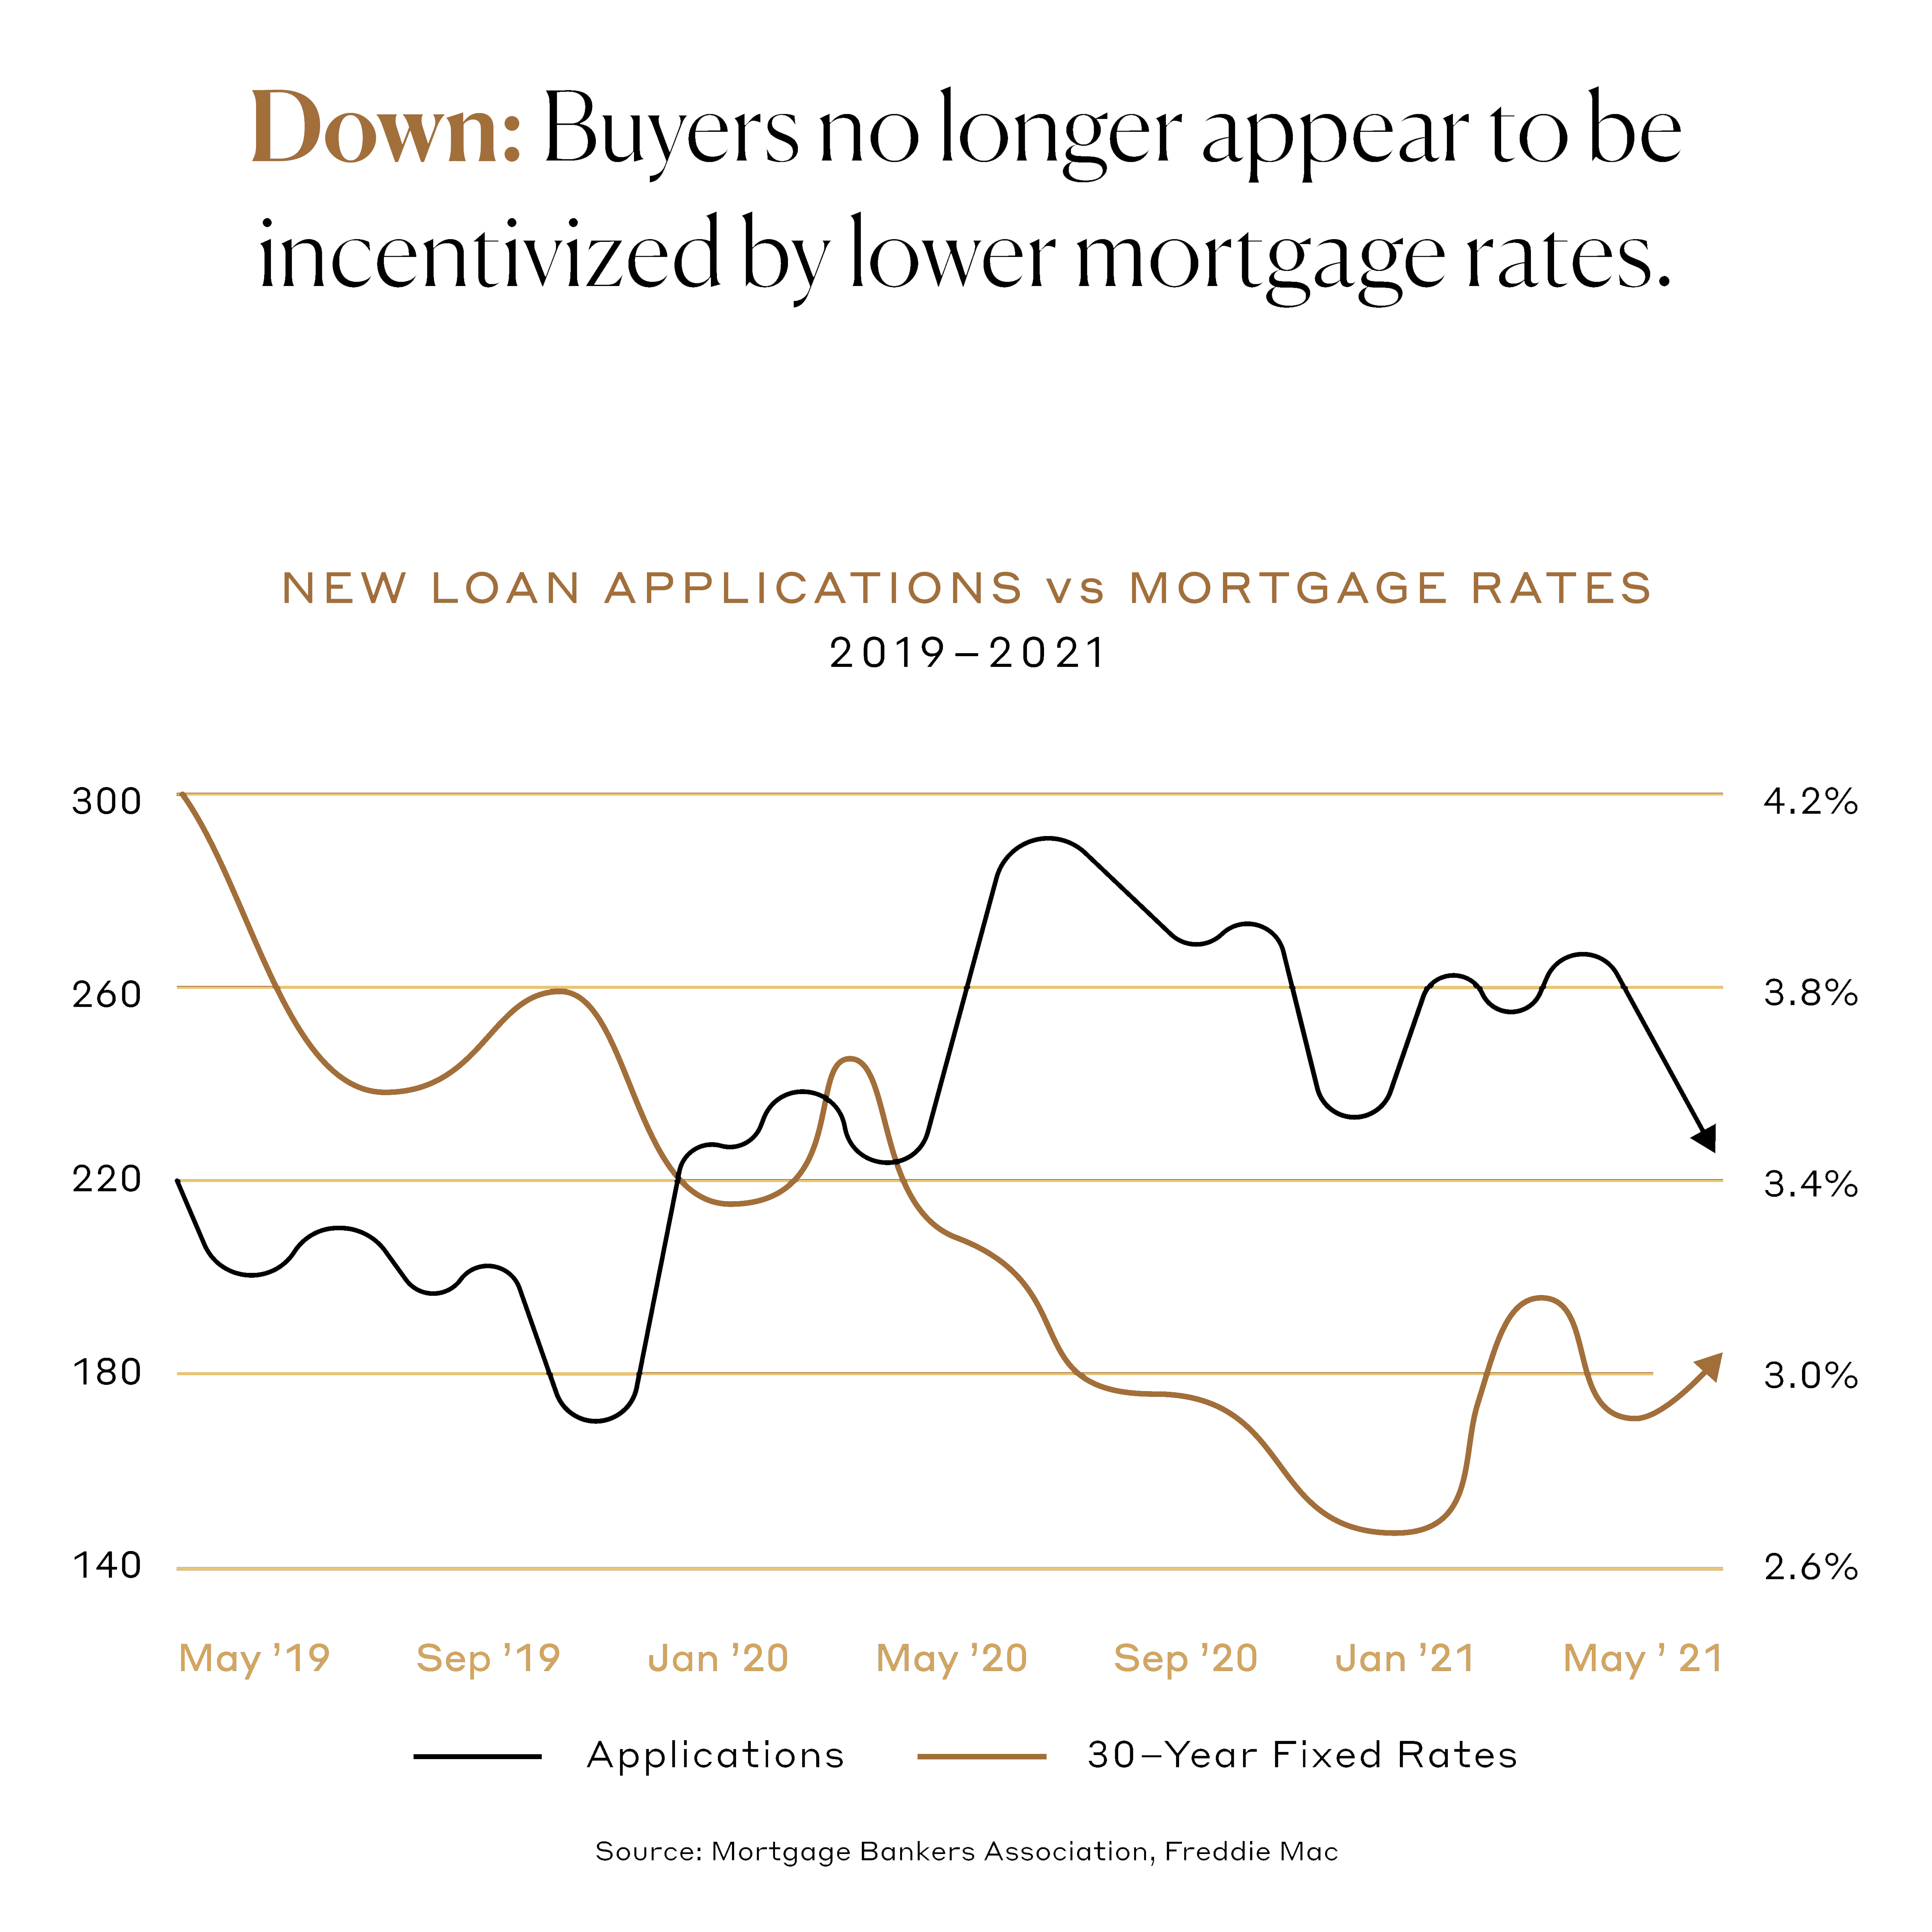 Down: Buyers no longer appear to be incentivized by lower mortgage rates.